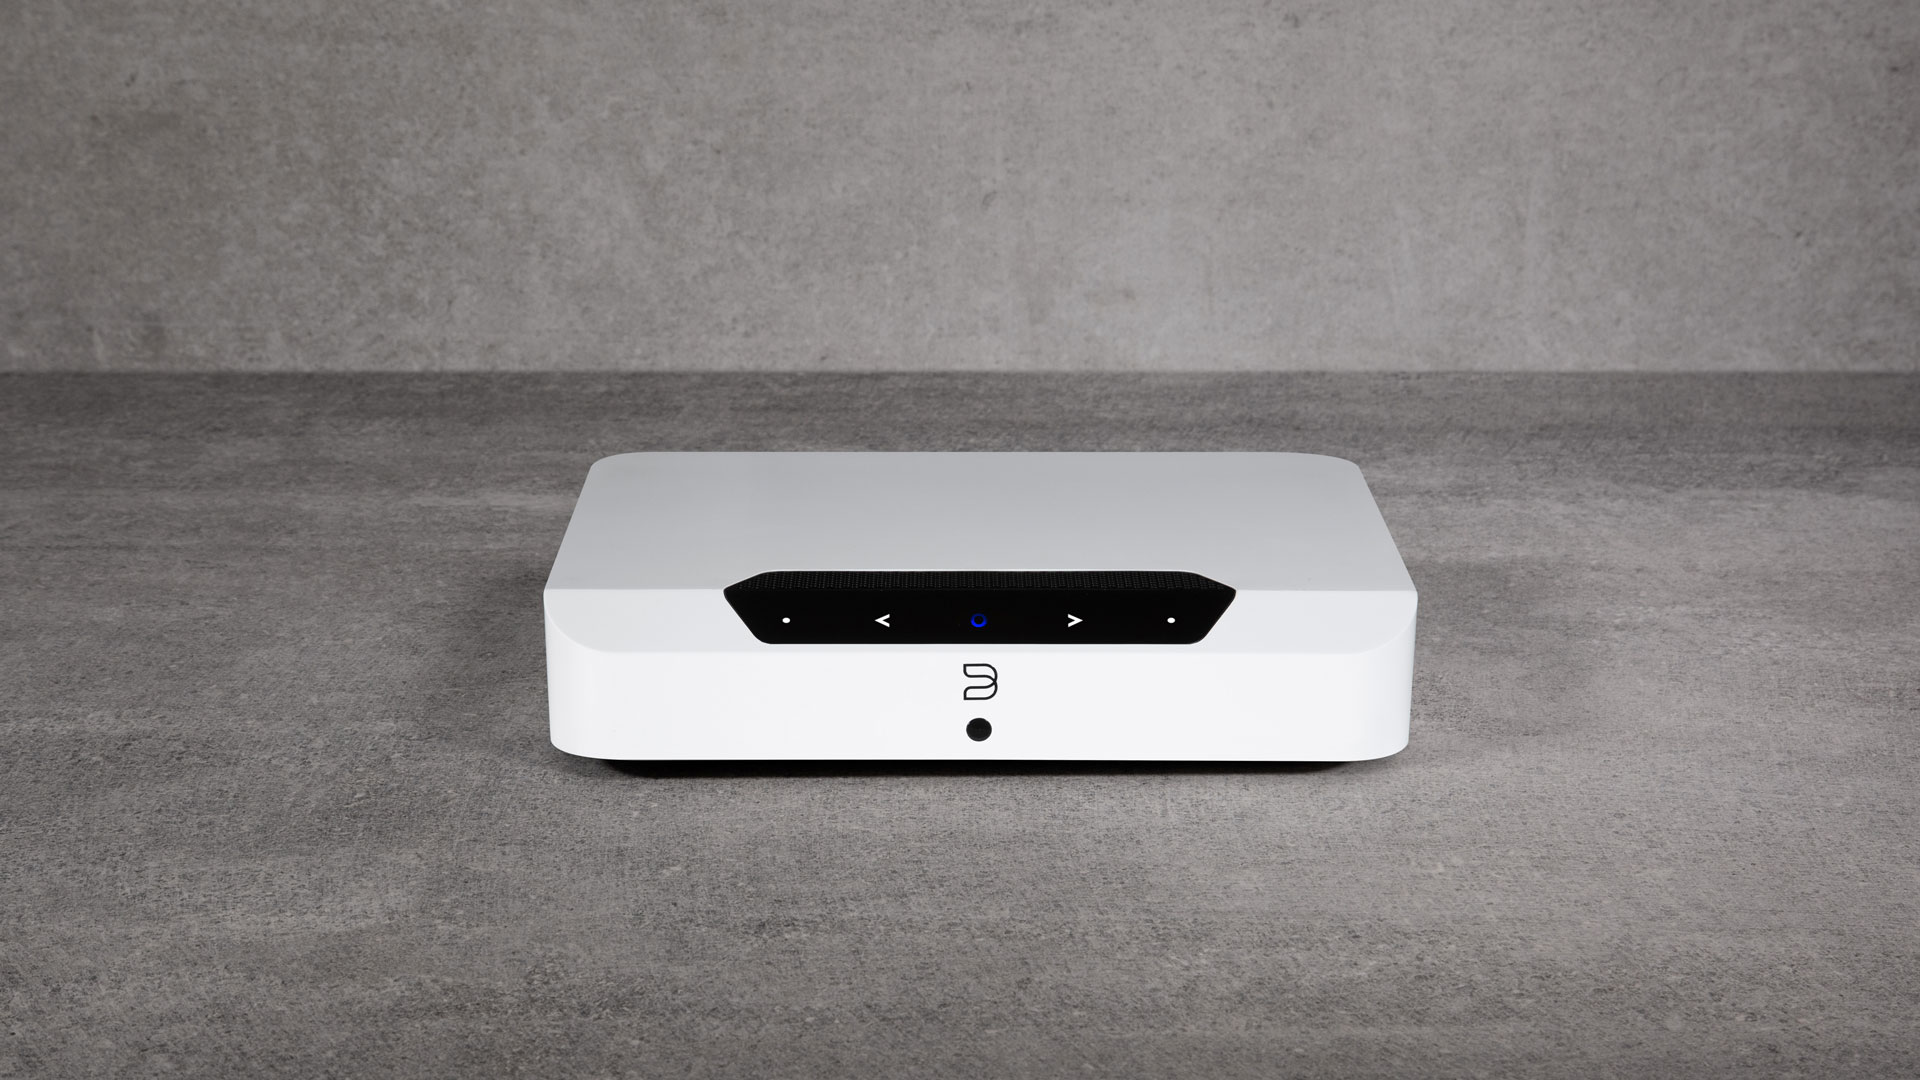 Powernode Edge: The new Streaming amp by Bluesound (Image Credit: Bluesound)